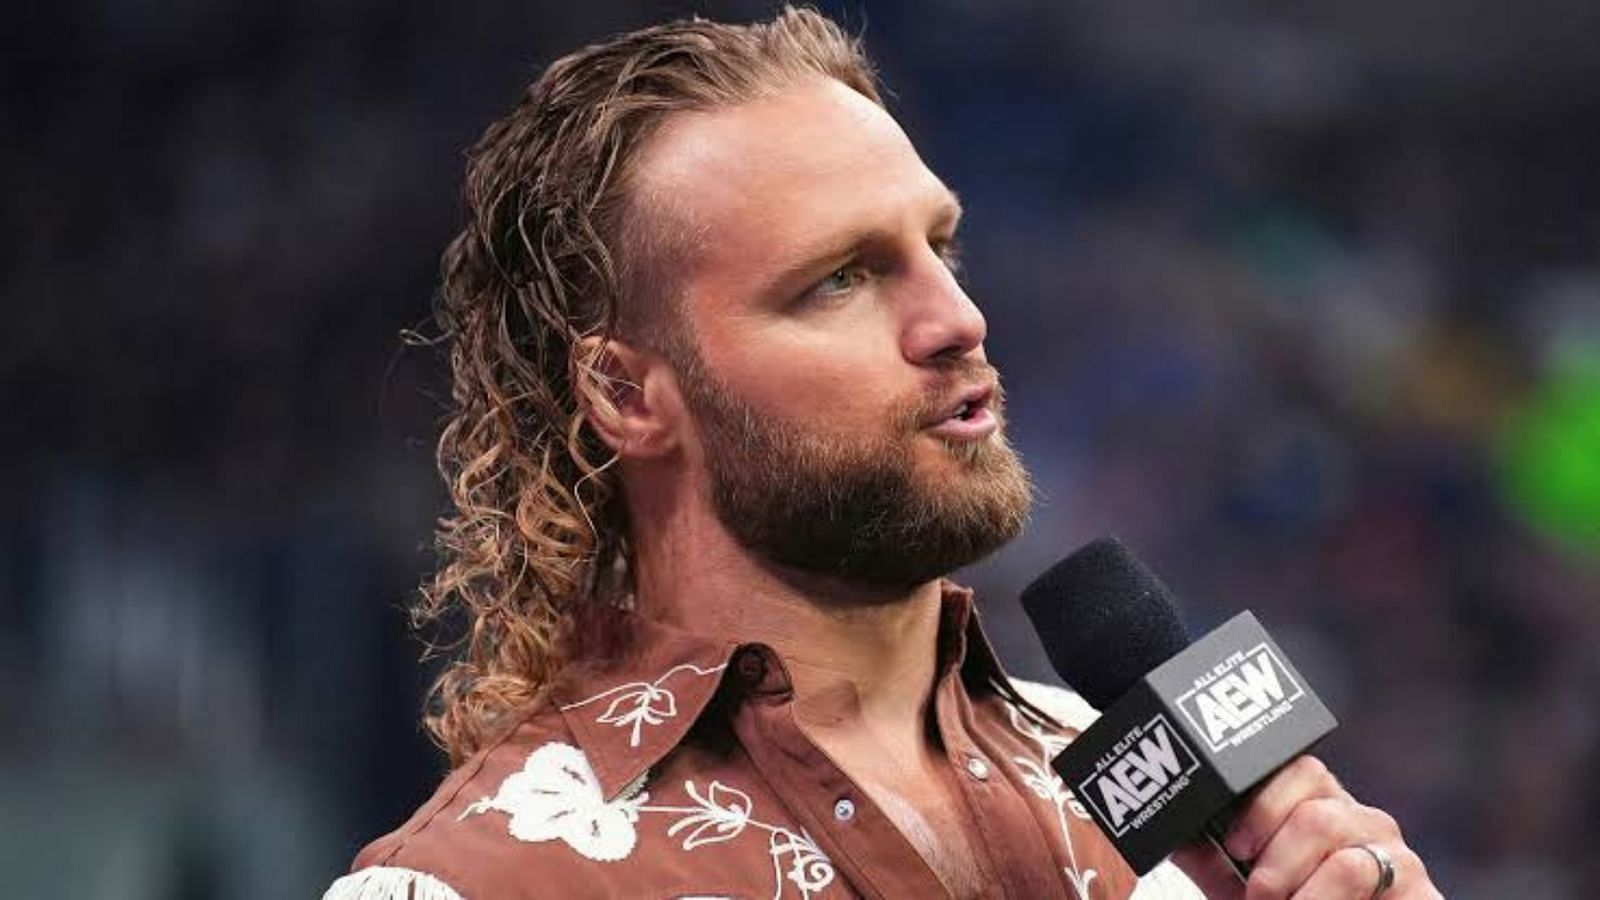 &quot;Hangman&quot; Adam Page is a former AEW World Champion